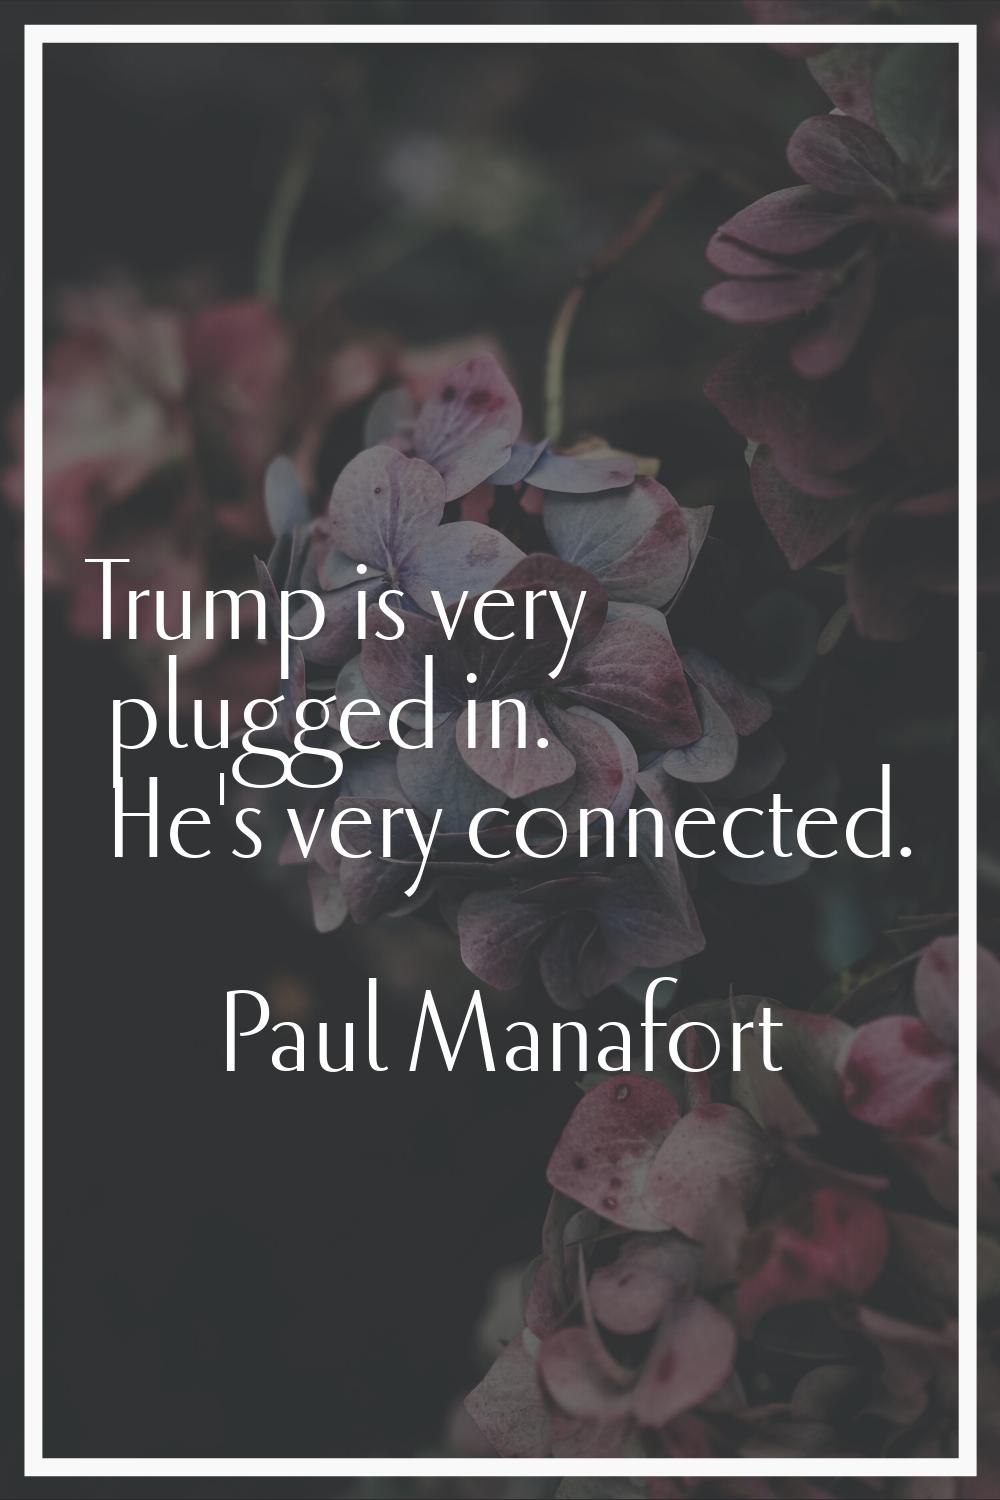 Trump is very plugged in. He's very connected.